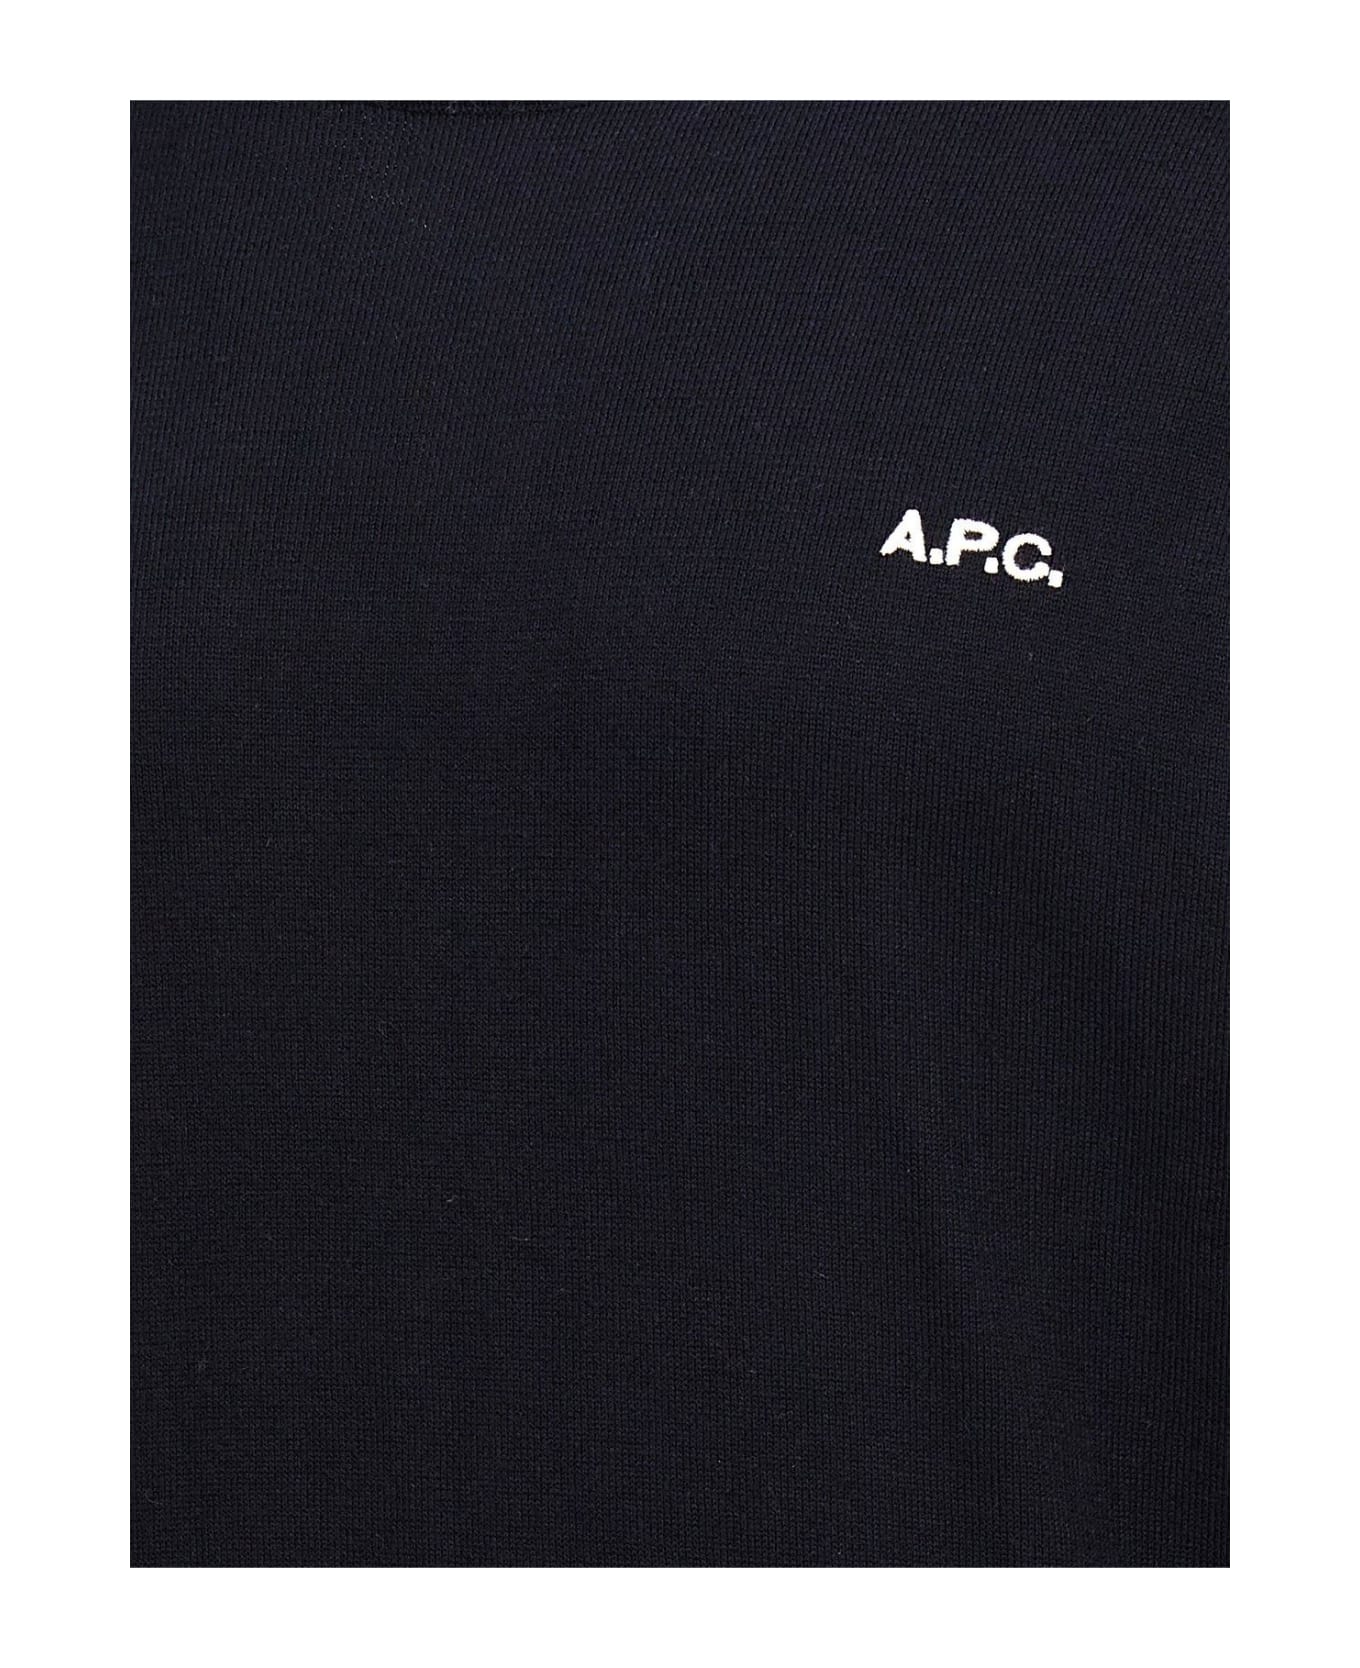 A.P.C. Logo Embroidered Knit Jumper - Blue